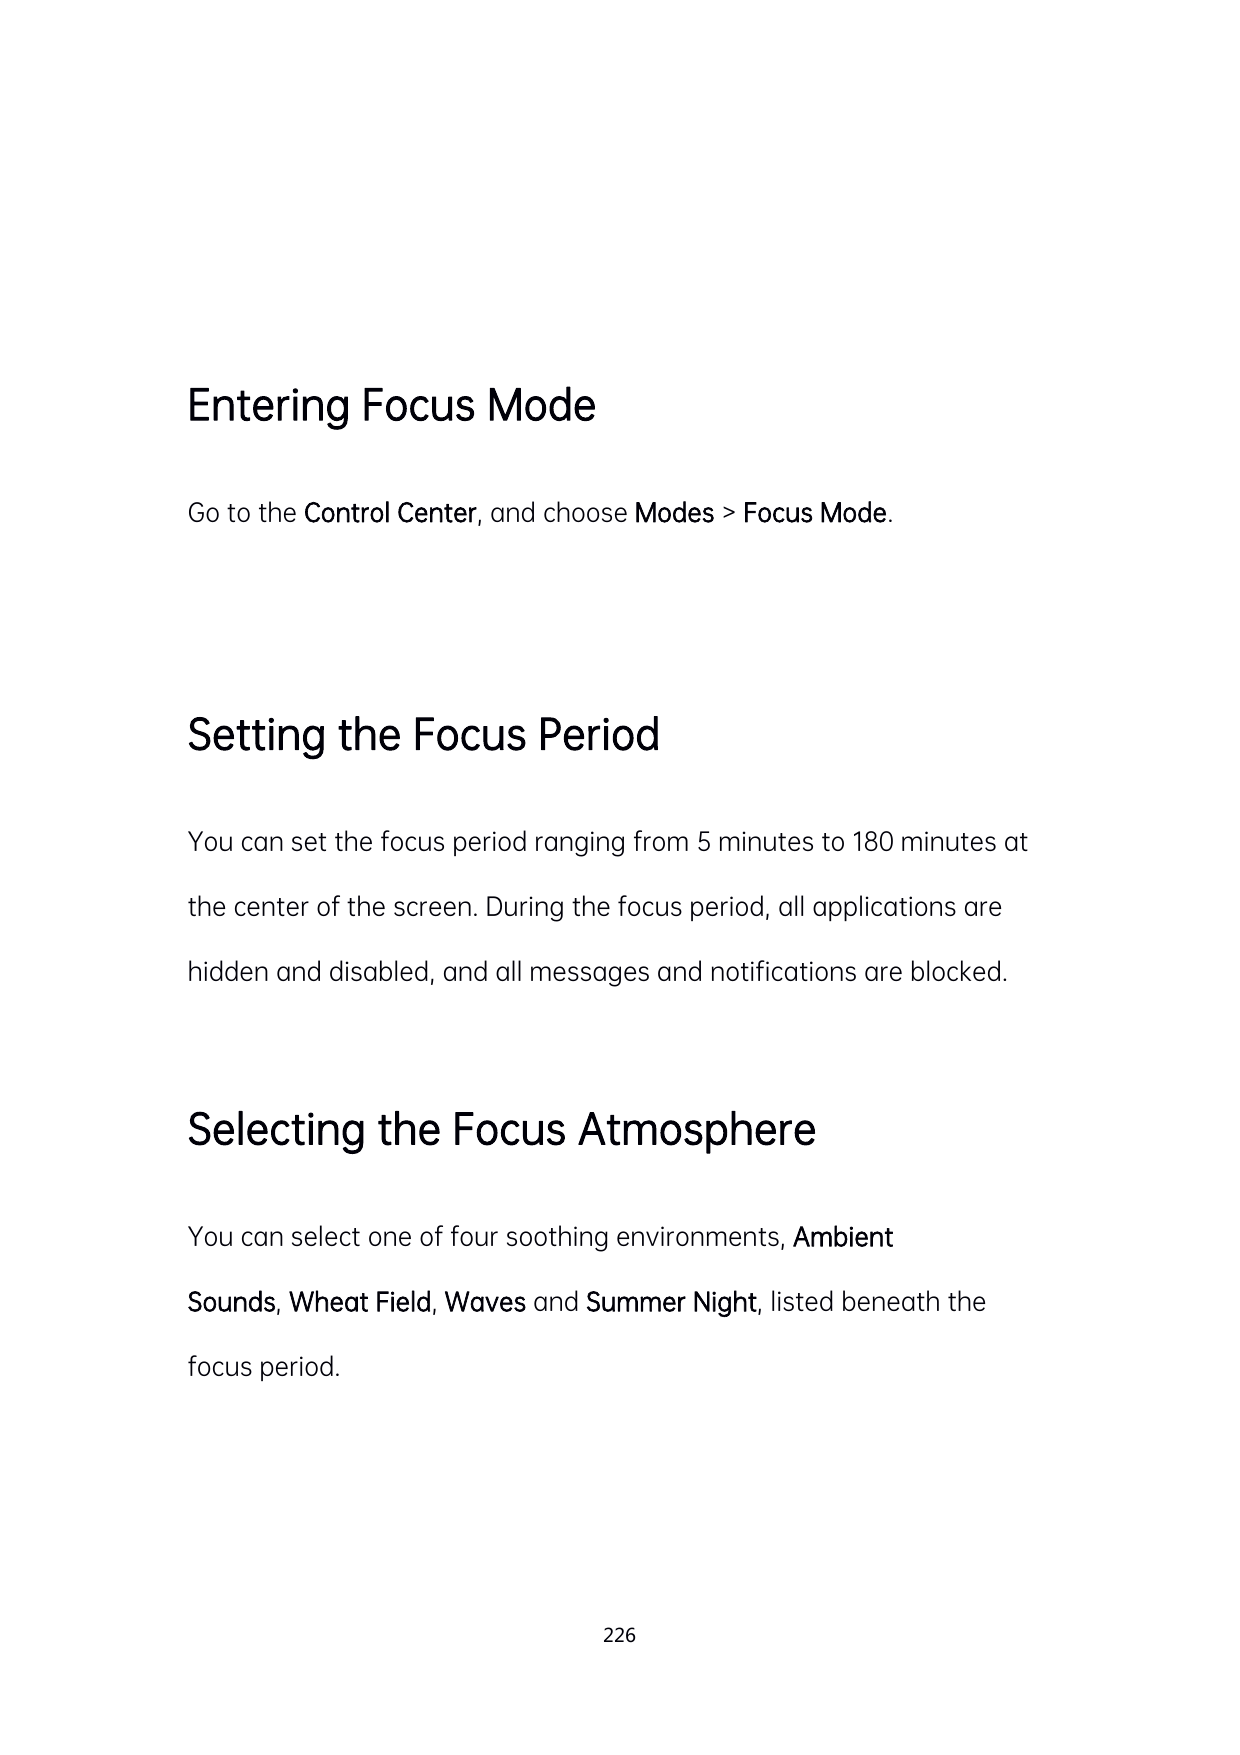 Entering Focus ModeGo to the Control Center, and choose Modes > Focus Mode.Setting the Focus PeriodYou can set the focus period 